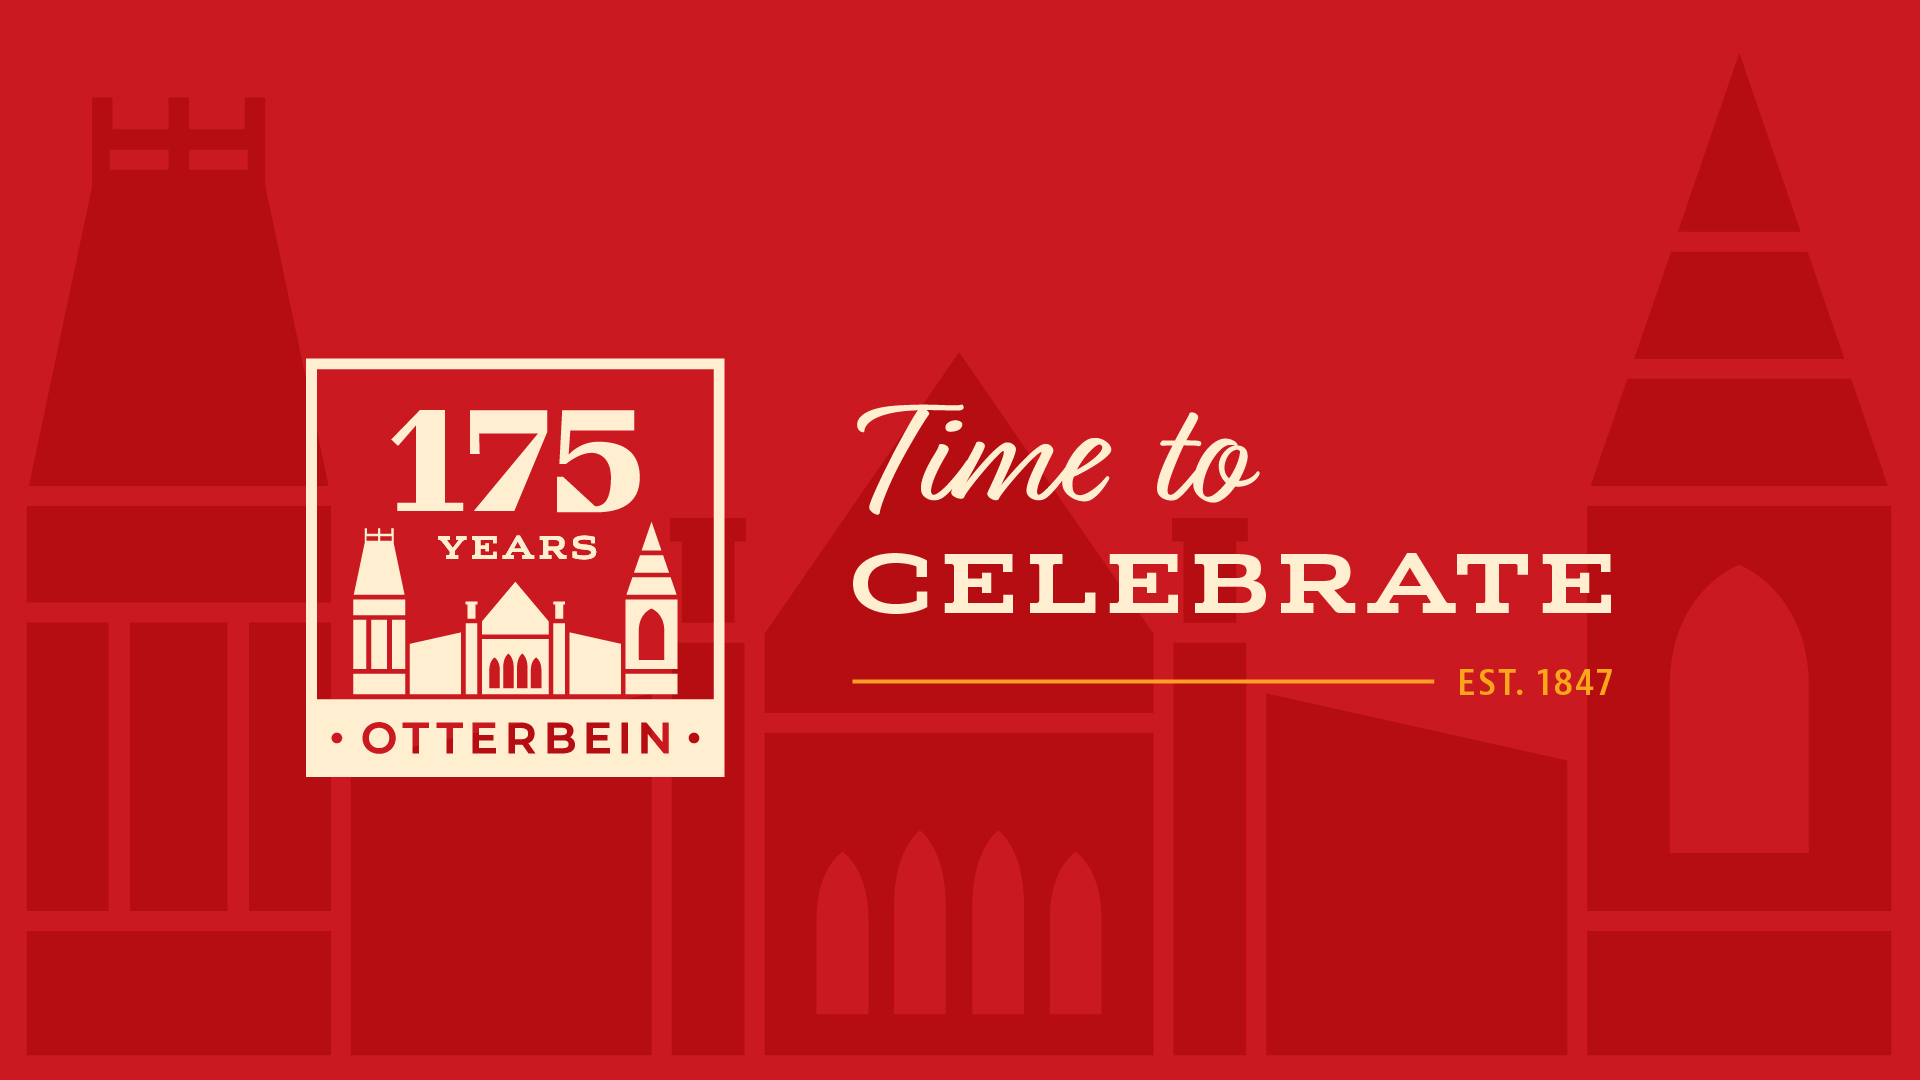 Logo and banner: 175 Years, Otterbein, Time to Celebrate.